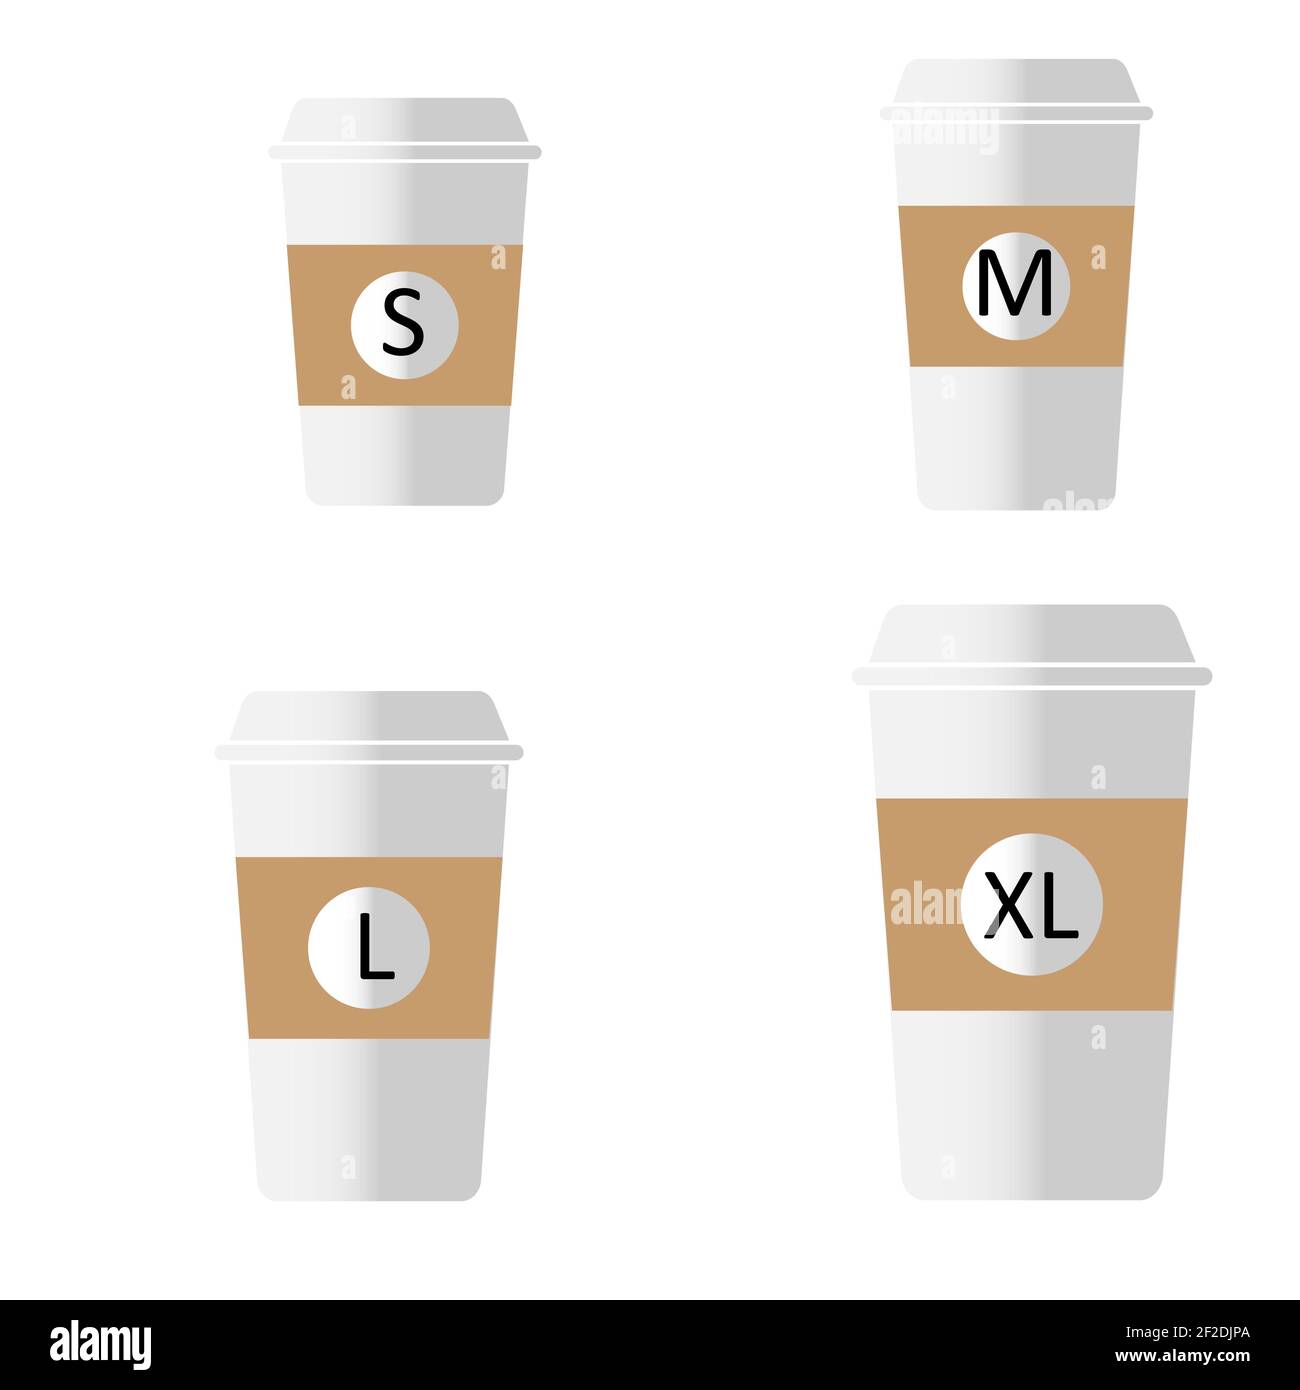 coffee to go different sizes sign. flat style. Coffee cup size S M L XL  icons on white background. take-away hot cup sizes symbol. different size -  sm Stock Photo - Alamy